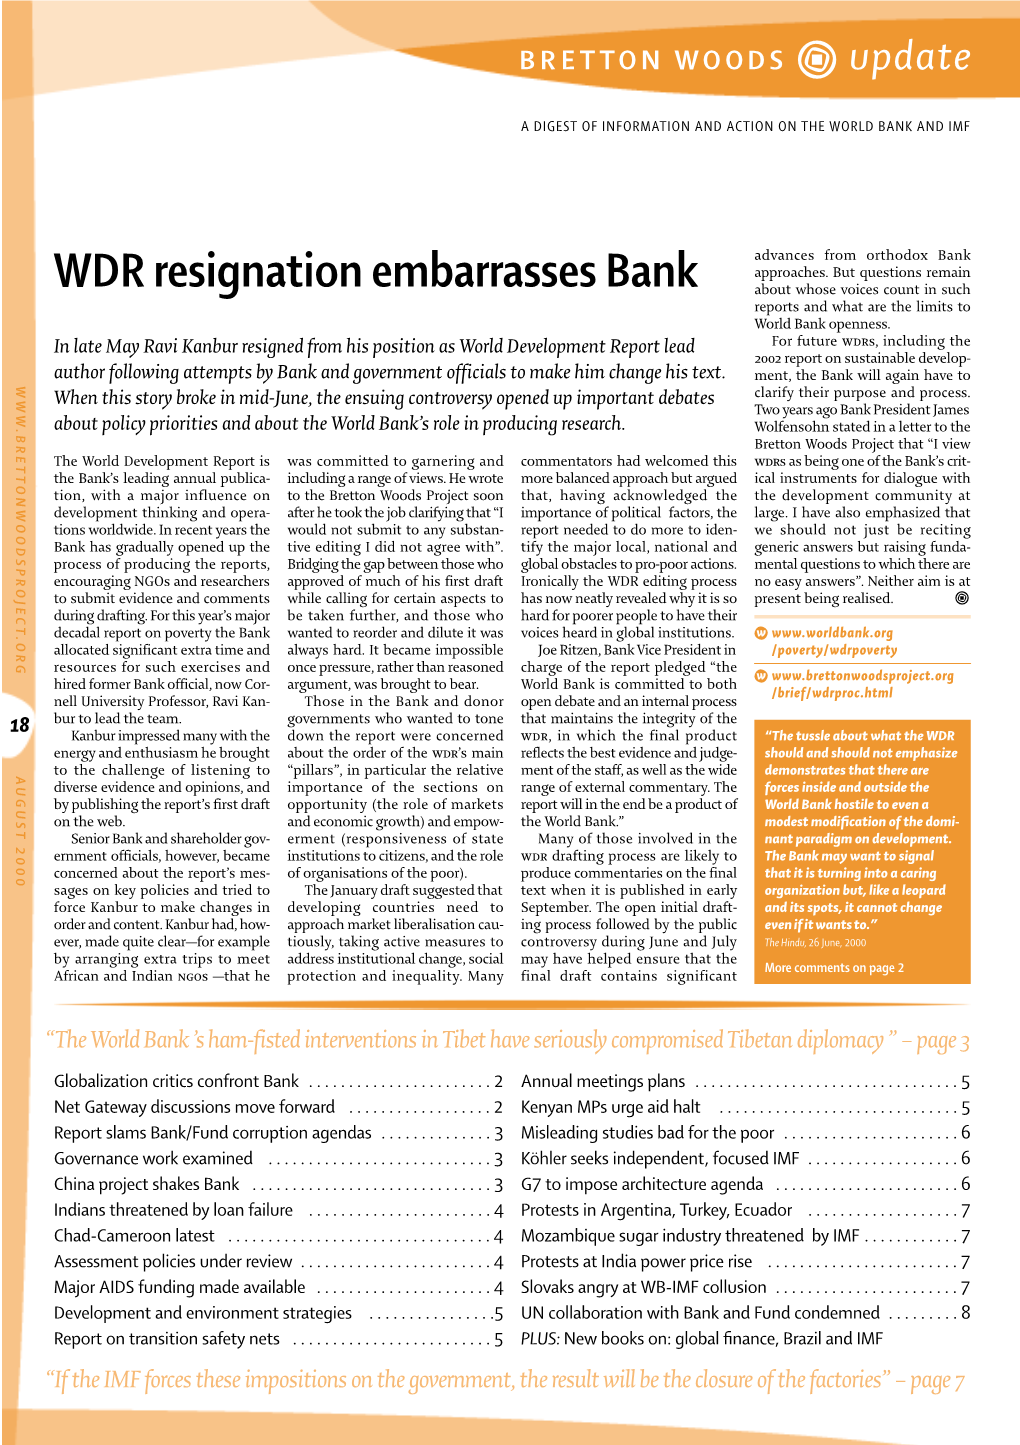 WDR Resignation Embarrasses Bank About Whose Voices Count in Such Reports and What Are the Limits to World Bank Openness